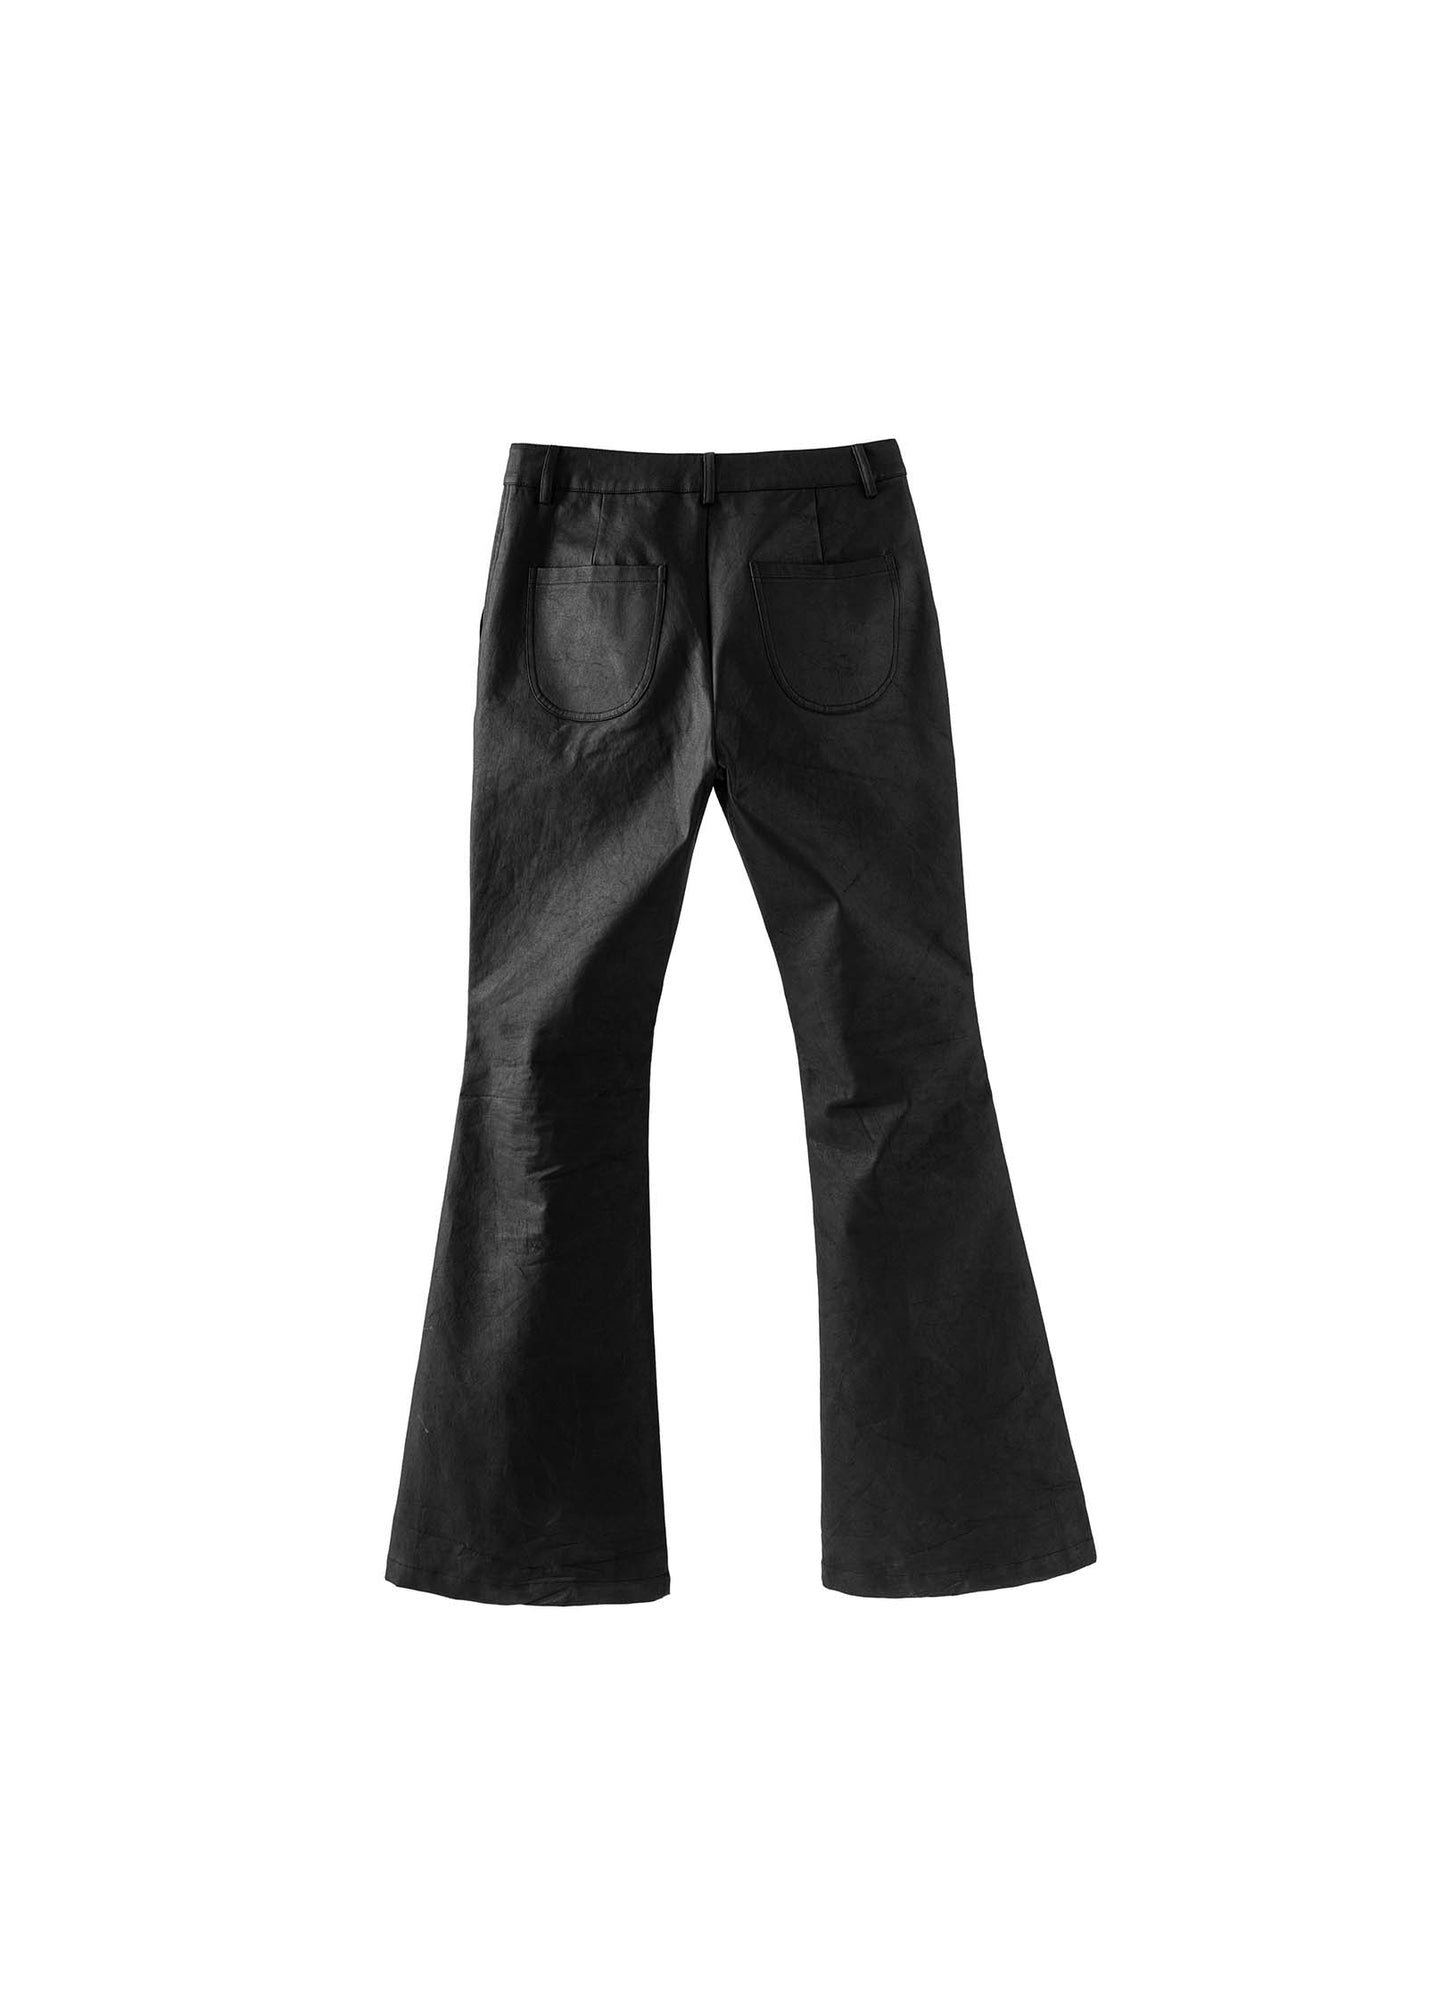 PU Leather Wave Flares